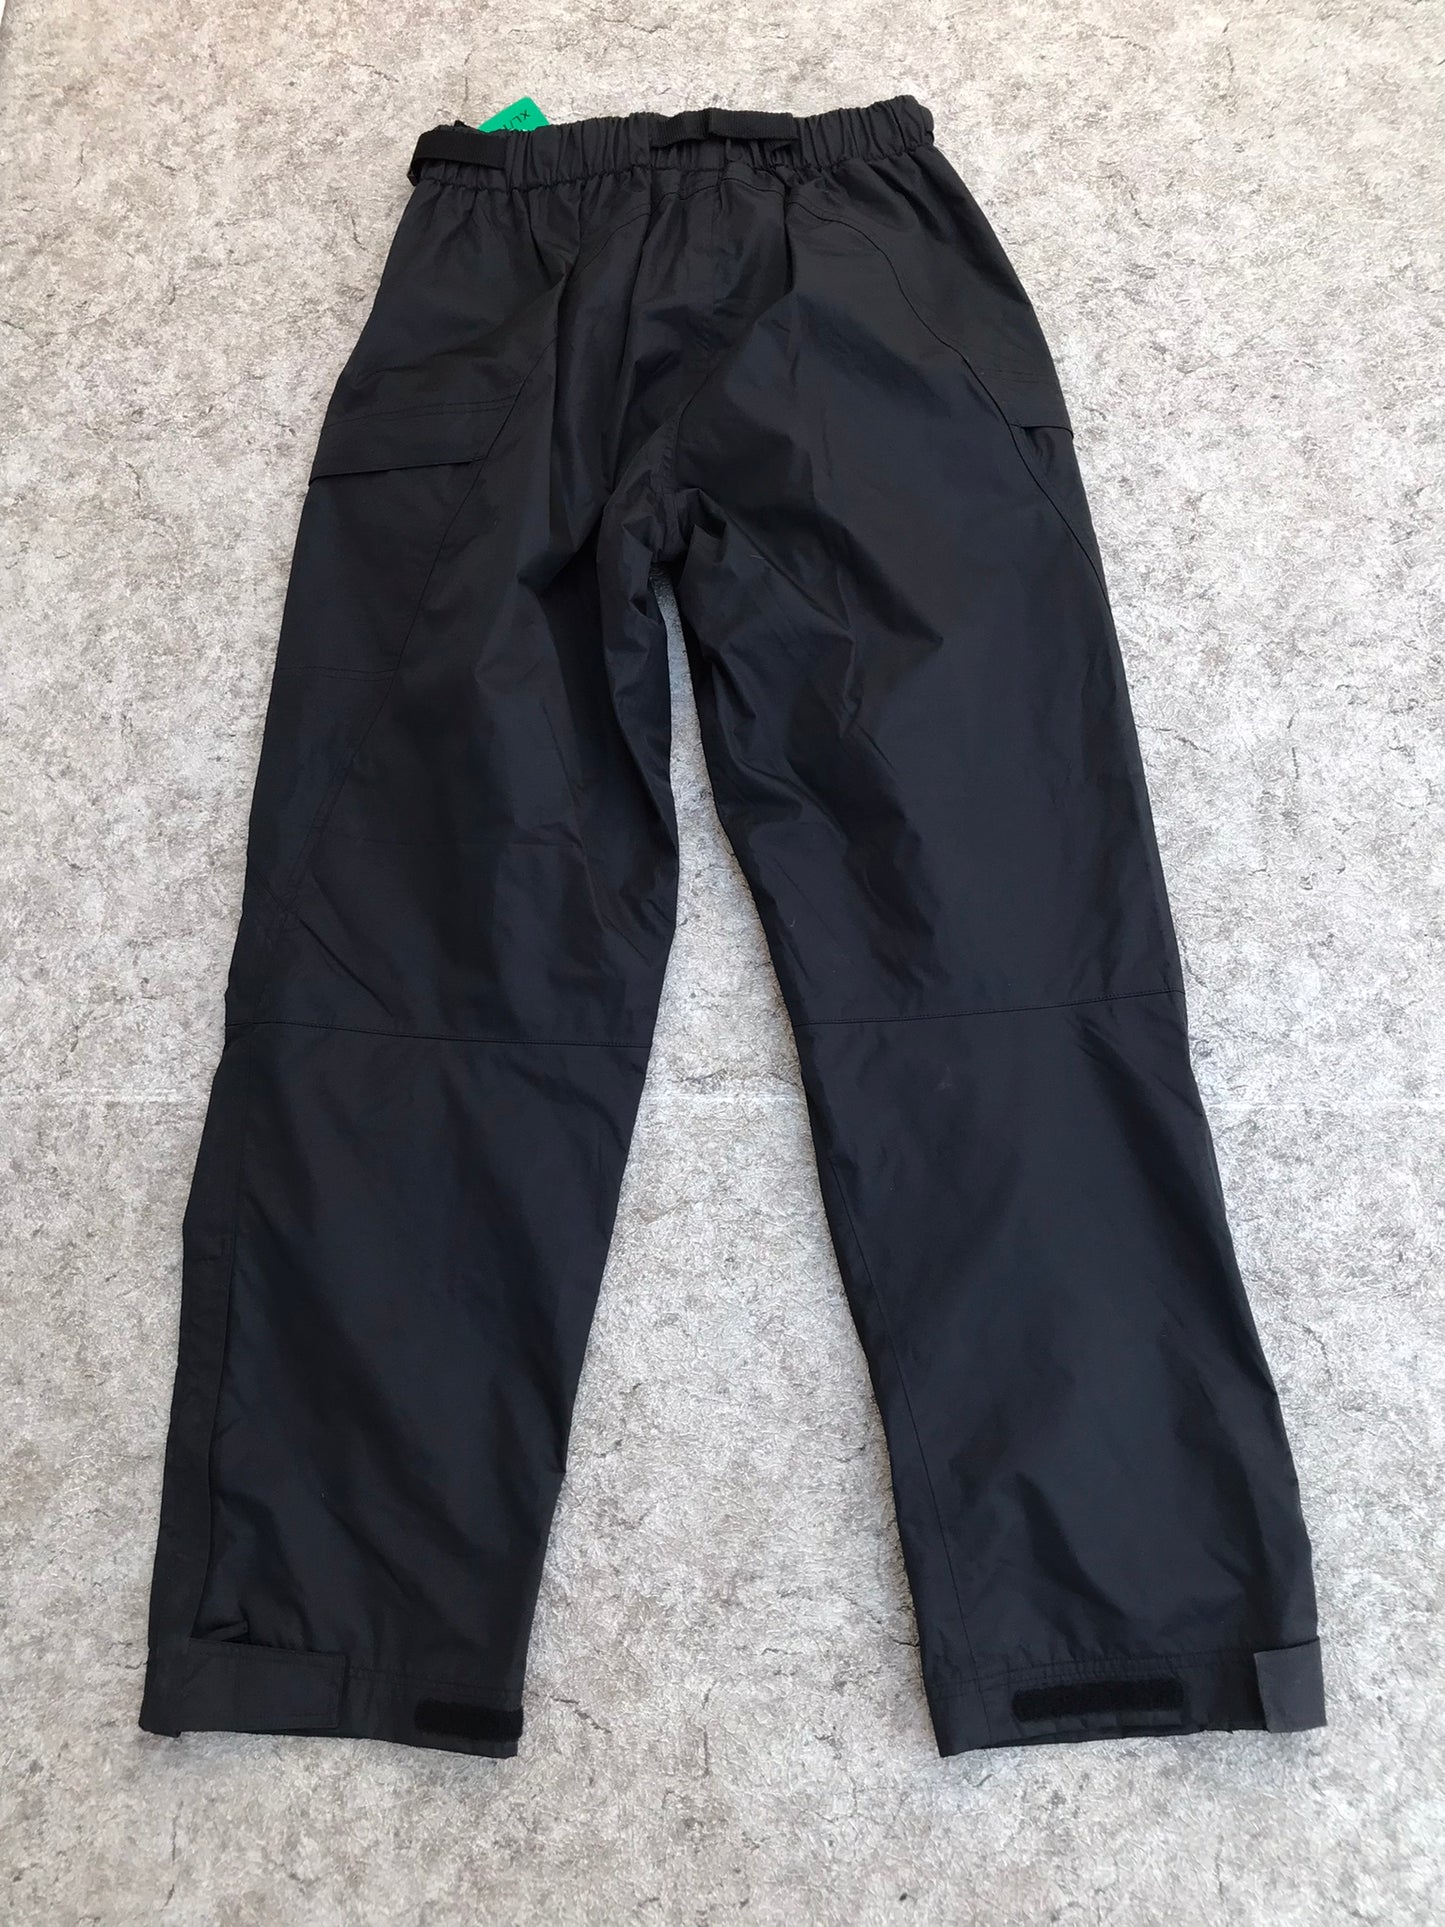 Rain Pants Men's Size X-Large Wetskins Waterproof Black New With Tags